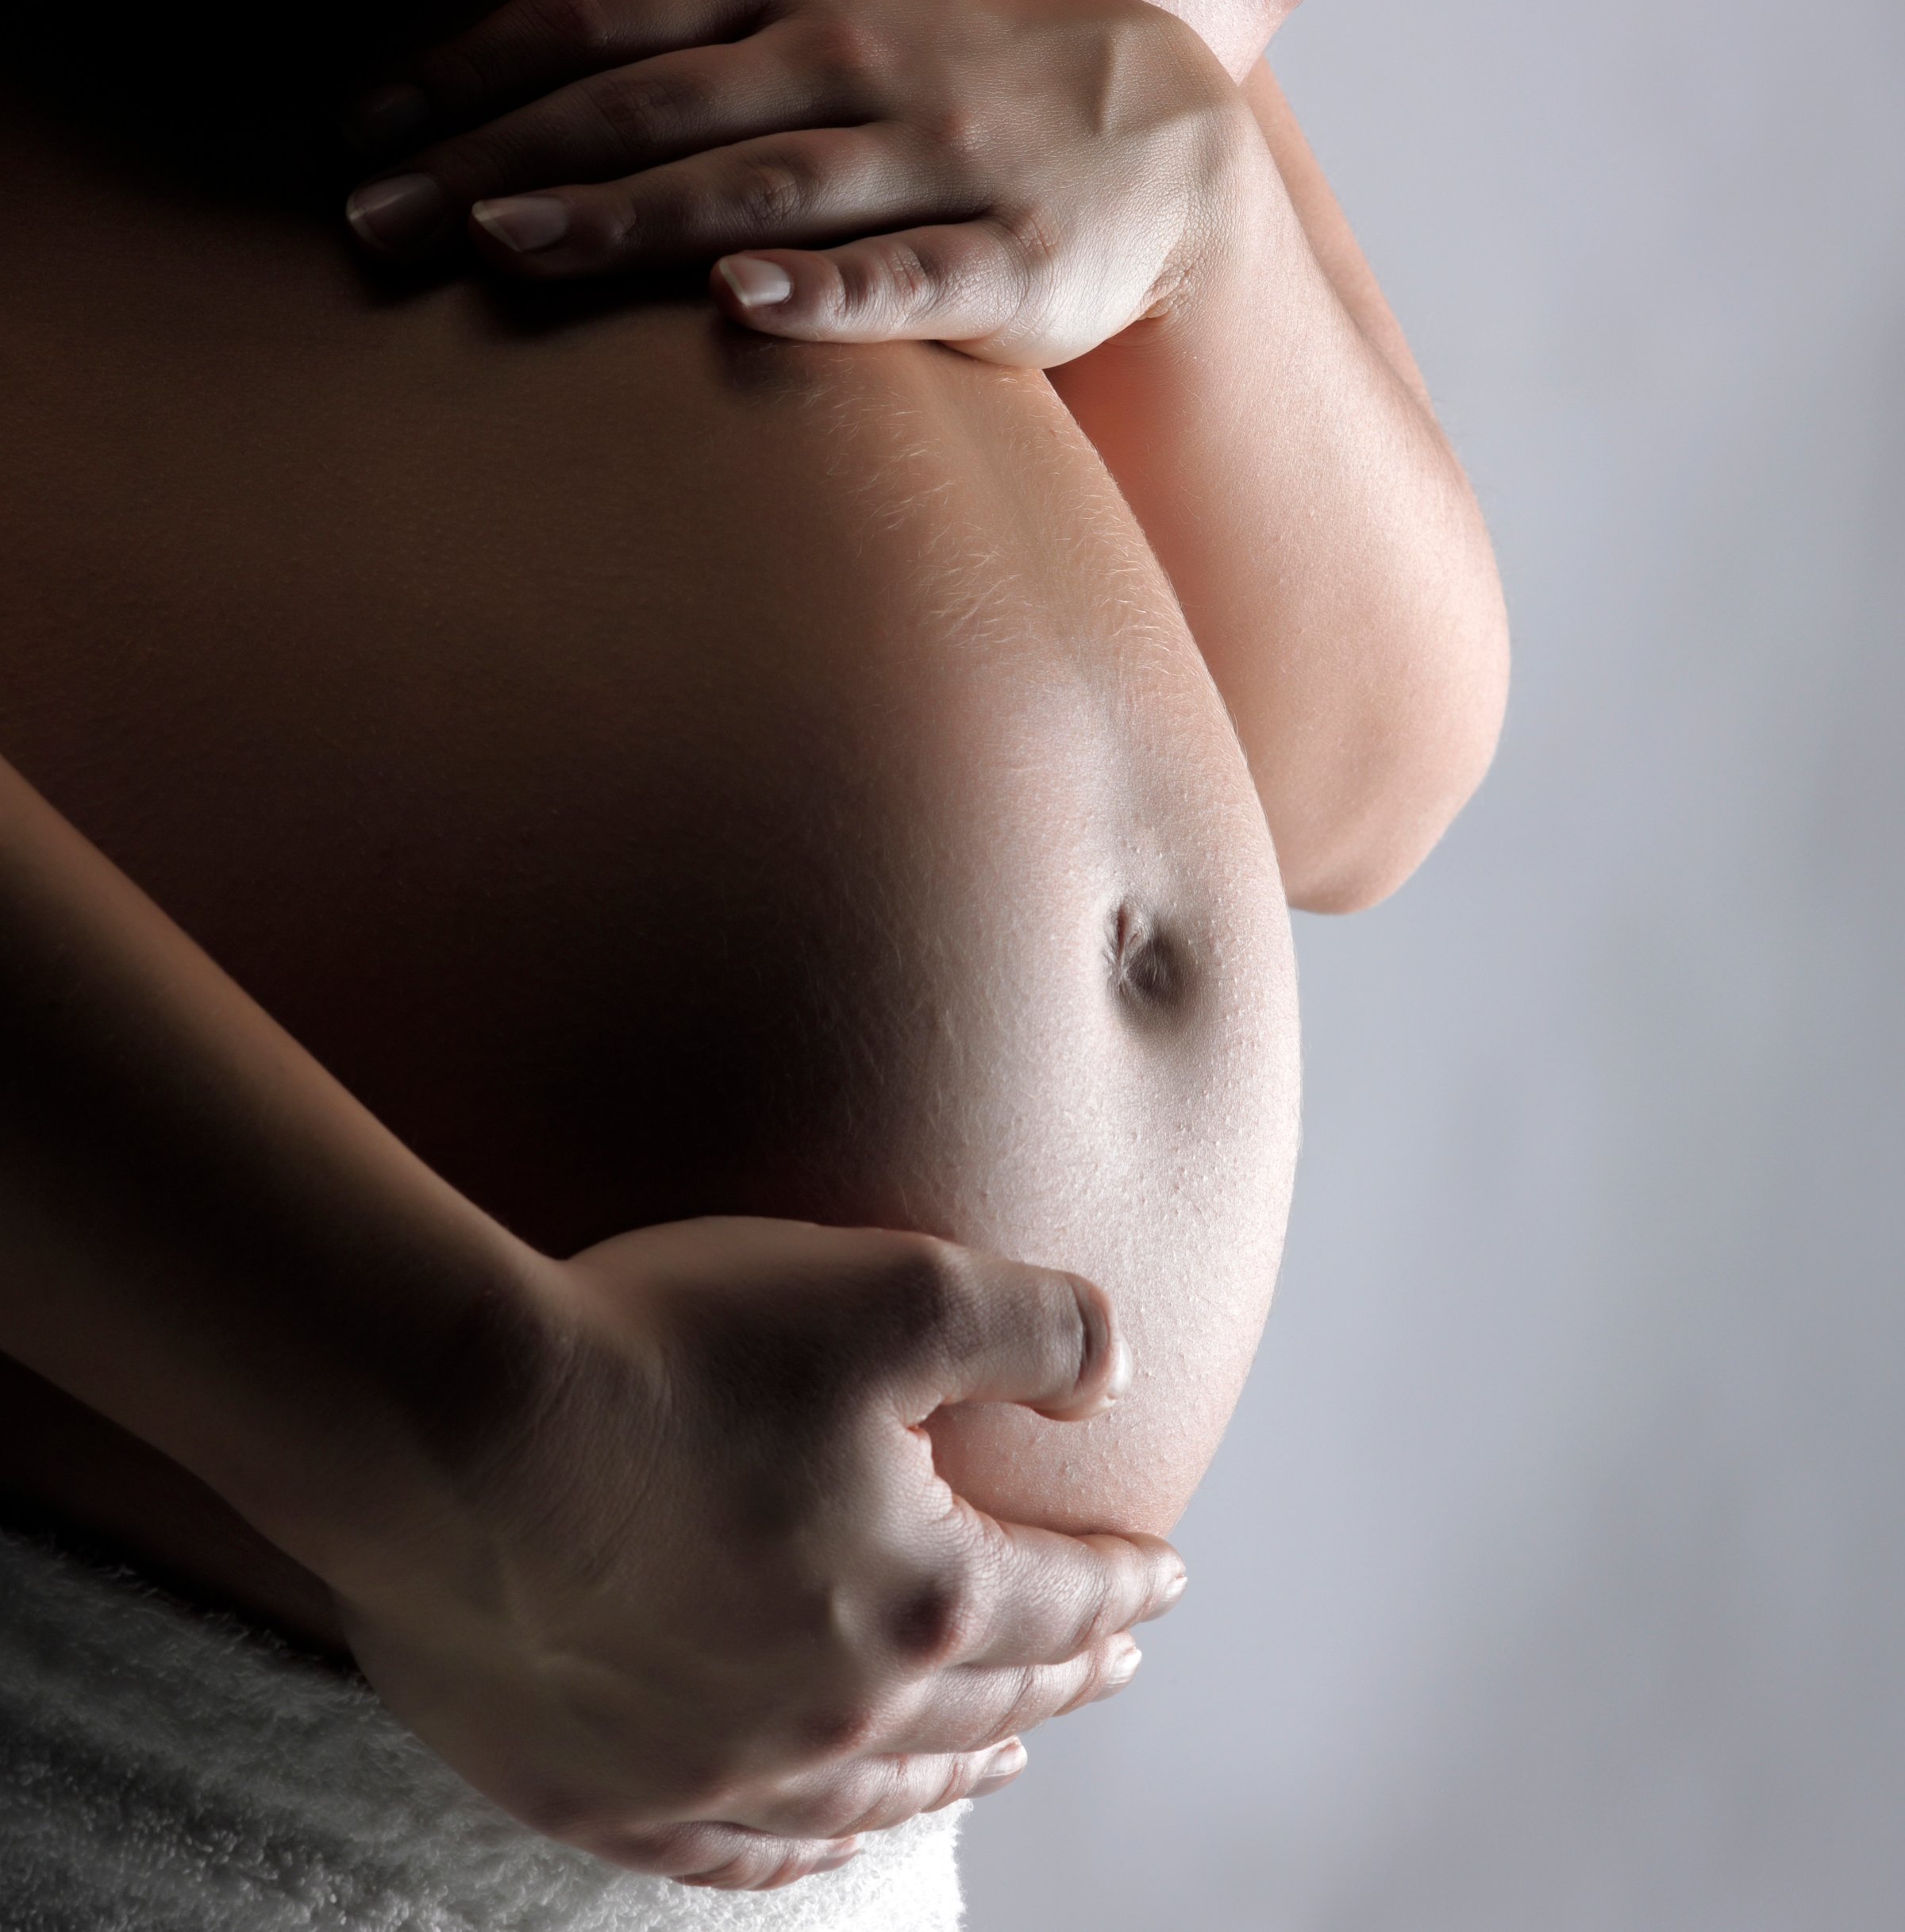 Pregnant woman supporting tummy